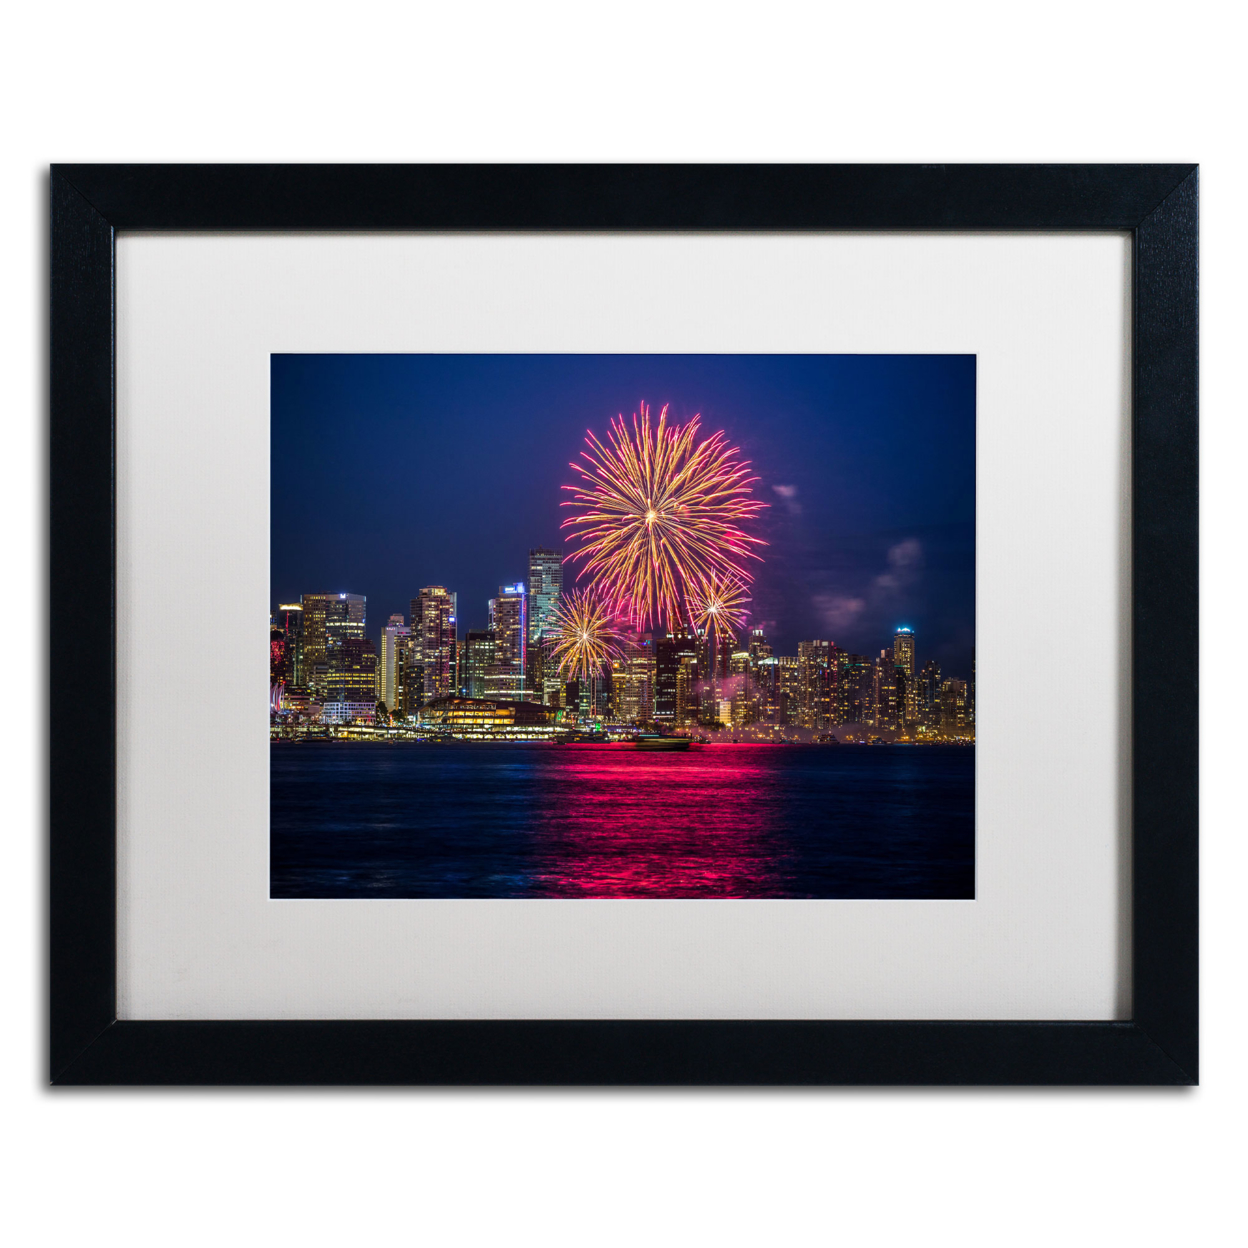 Pierre Leclerc 'Vancouver Fireworks' Black Wooden Framed Art 18 X 22 Inches